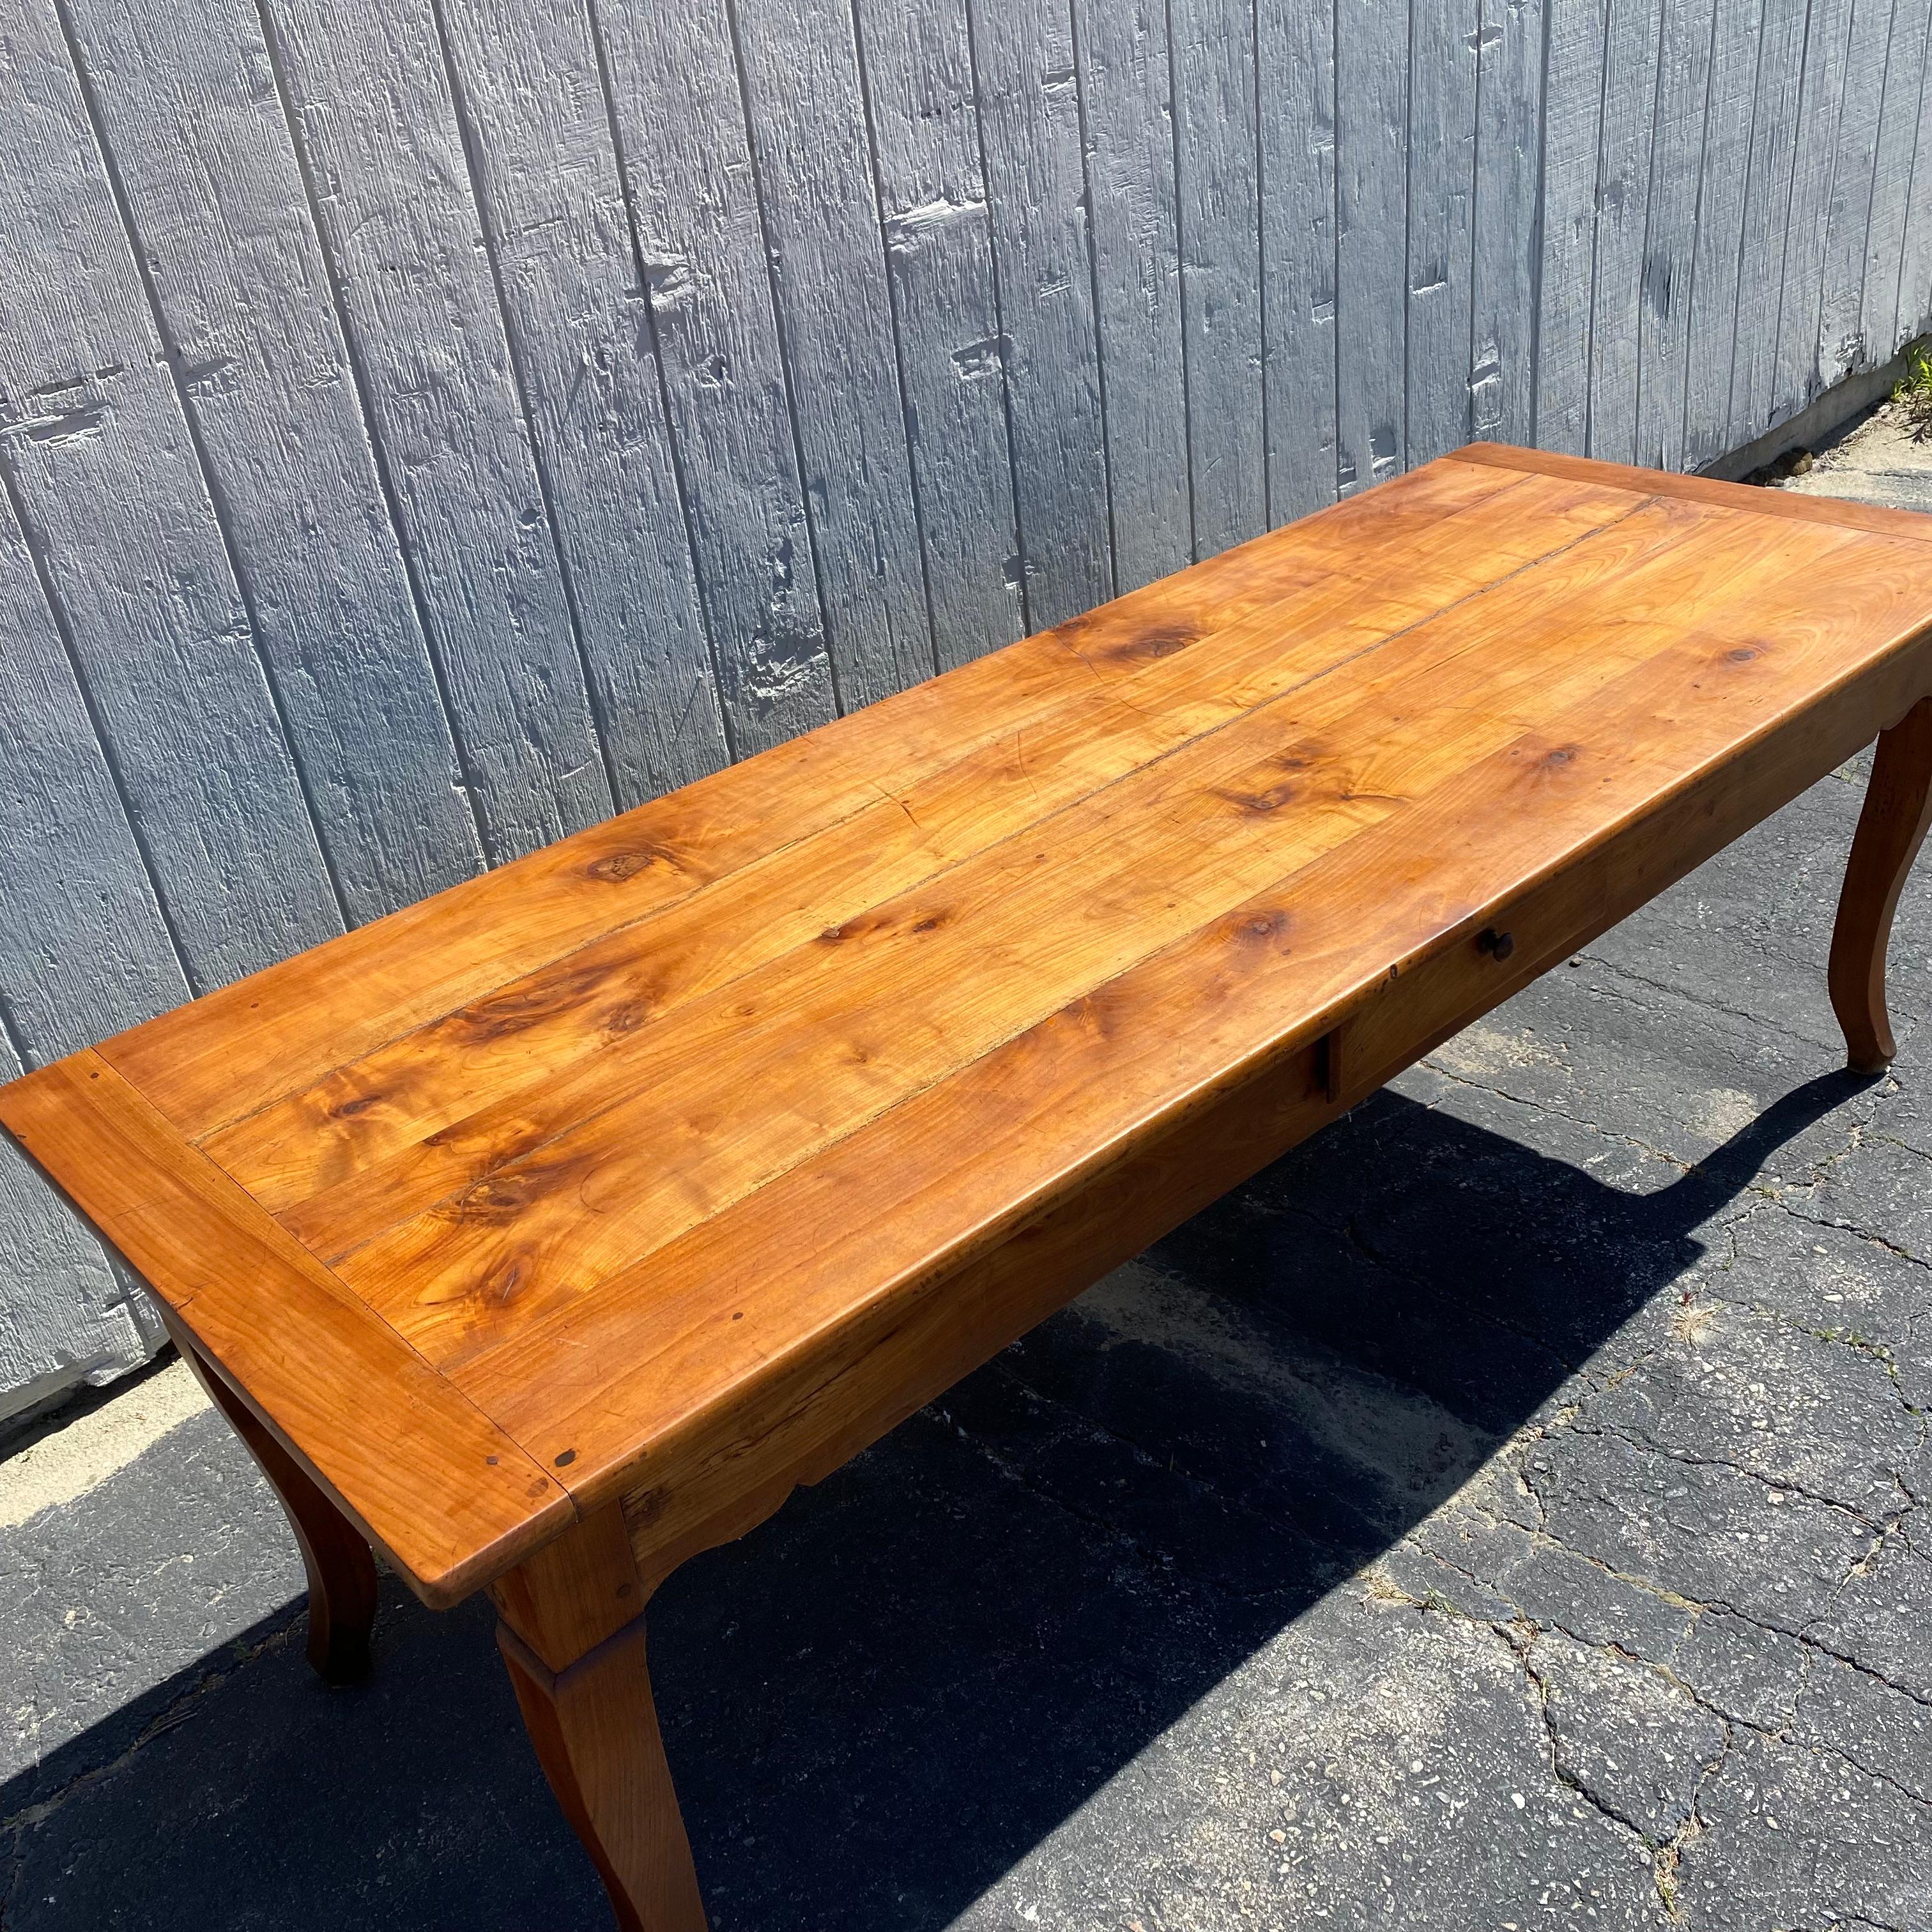 French provincial cherry farmhouse table with graceful cabriole legs, single center drawer, shaped skirt all around, and two breadboard leaves on either end of the table that extend to make the table 10 feet long. This early 19th century table was